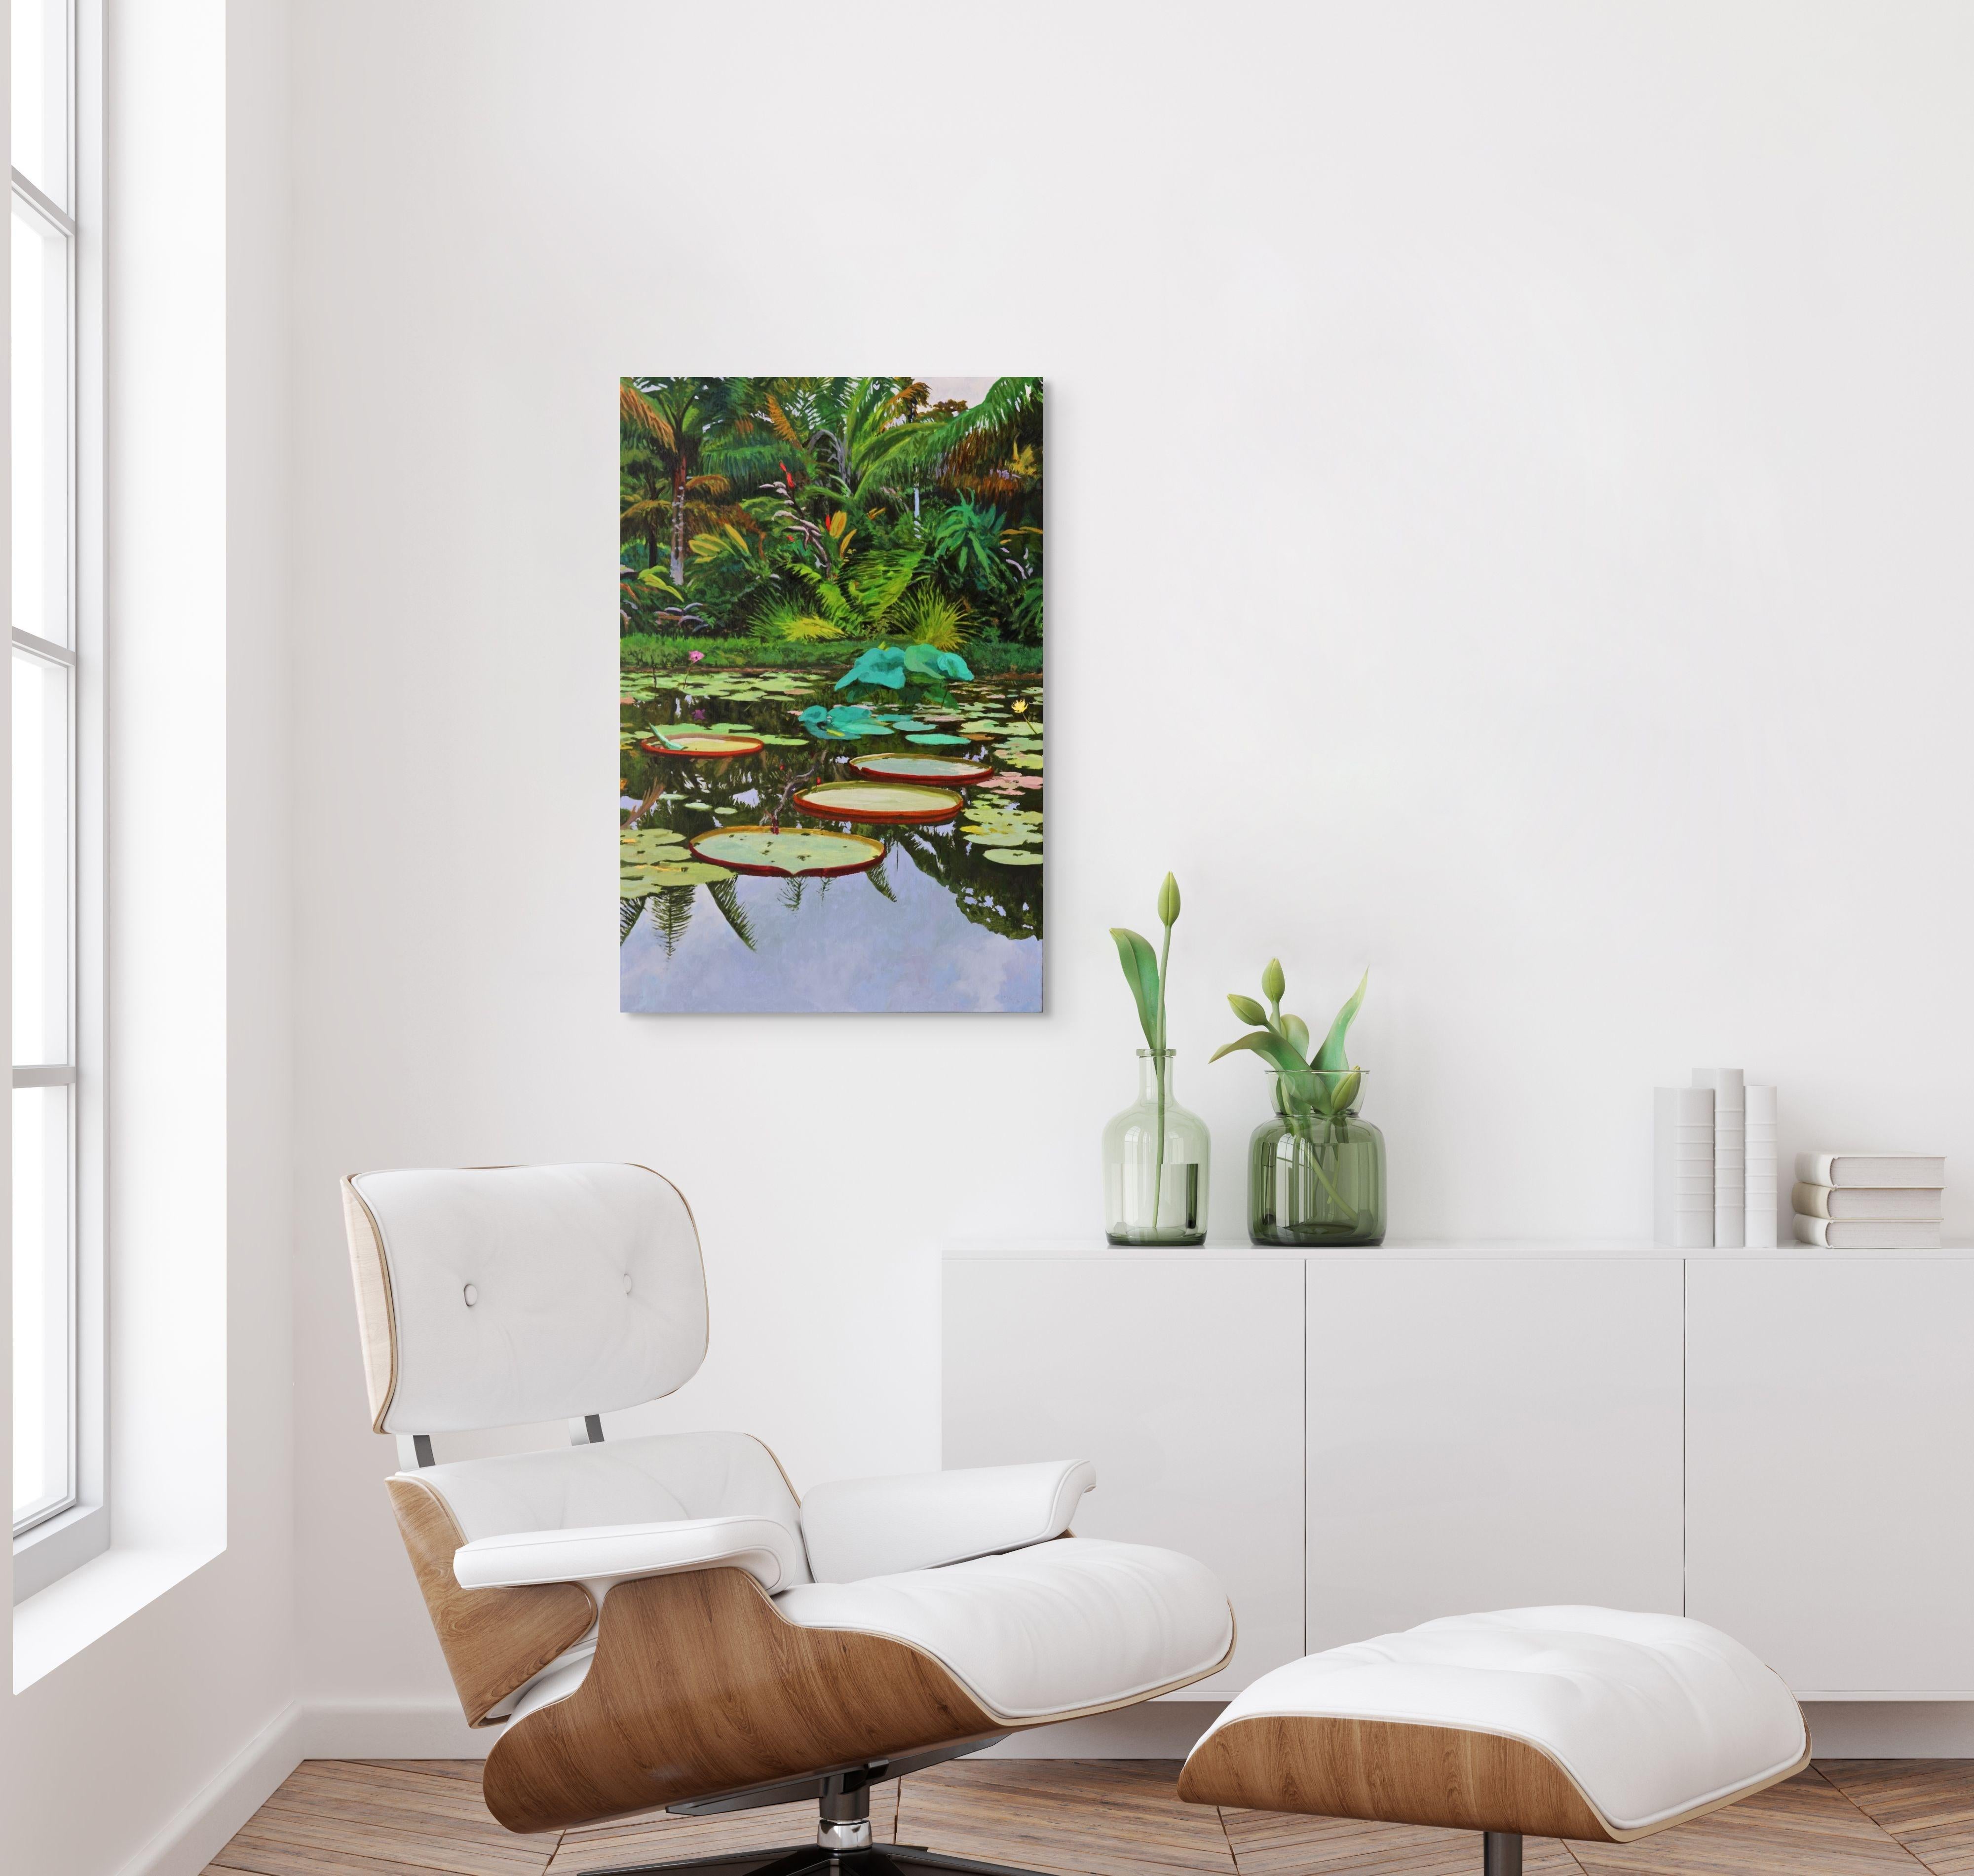 Lily Pond at Pana'ewa / oil on canvas painting - 36 x 24 inches - Painting by Peter Loftus